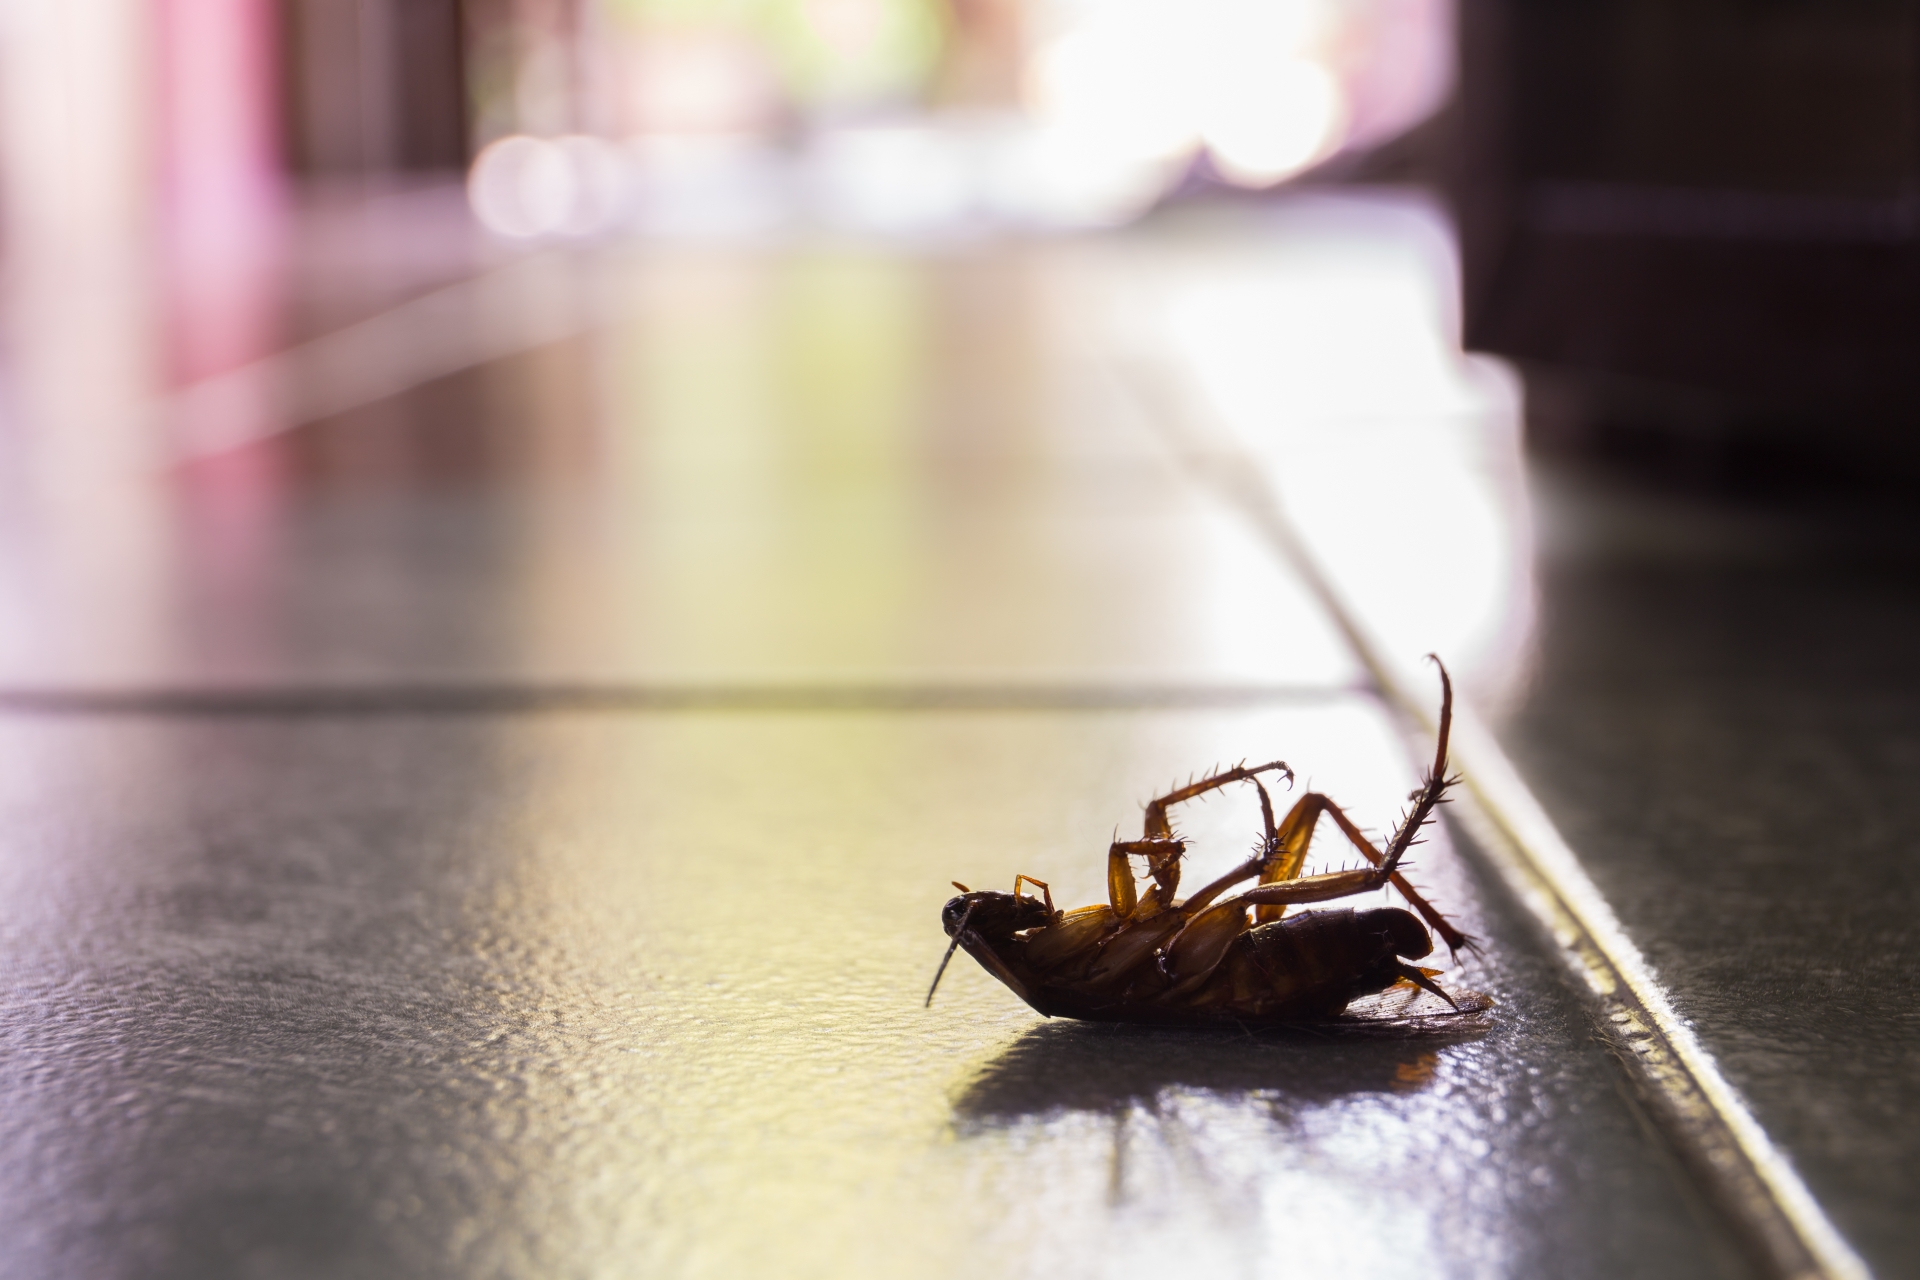 Cockroach Control, Pest Control in Swanley, Hextable, Crockenhill, BR8. Call Now 020 8166 9746